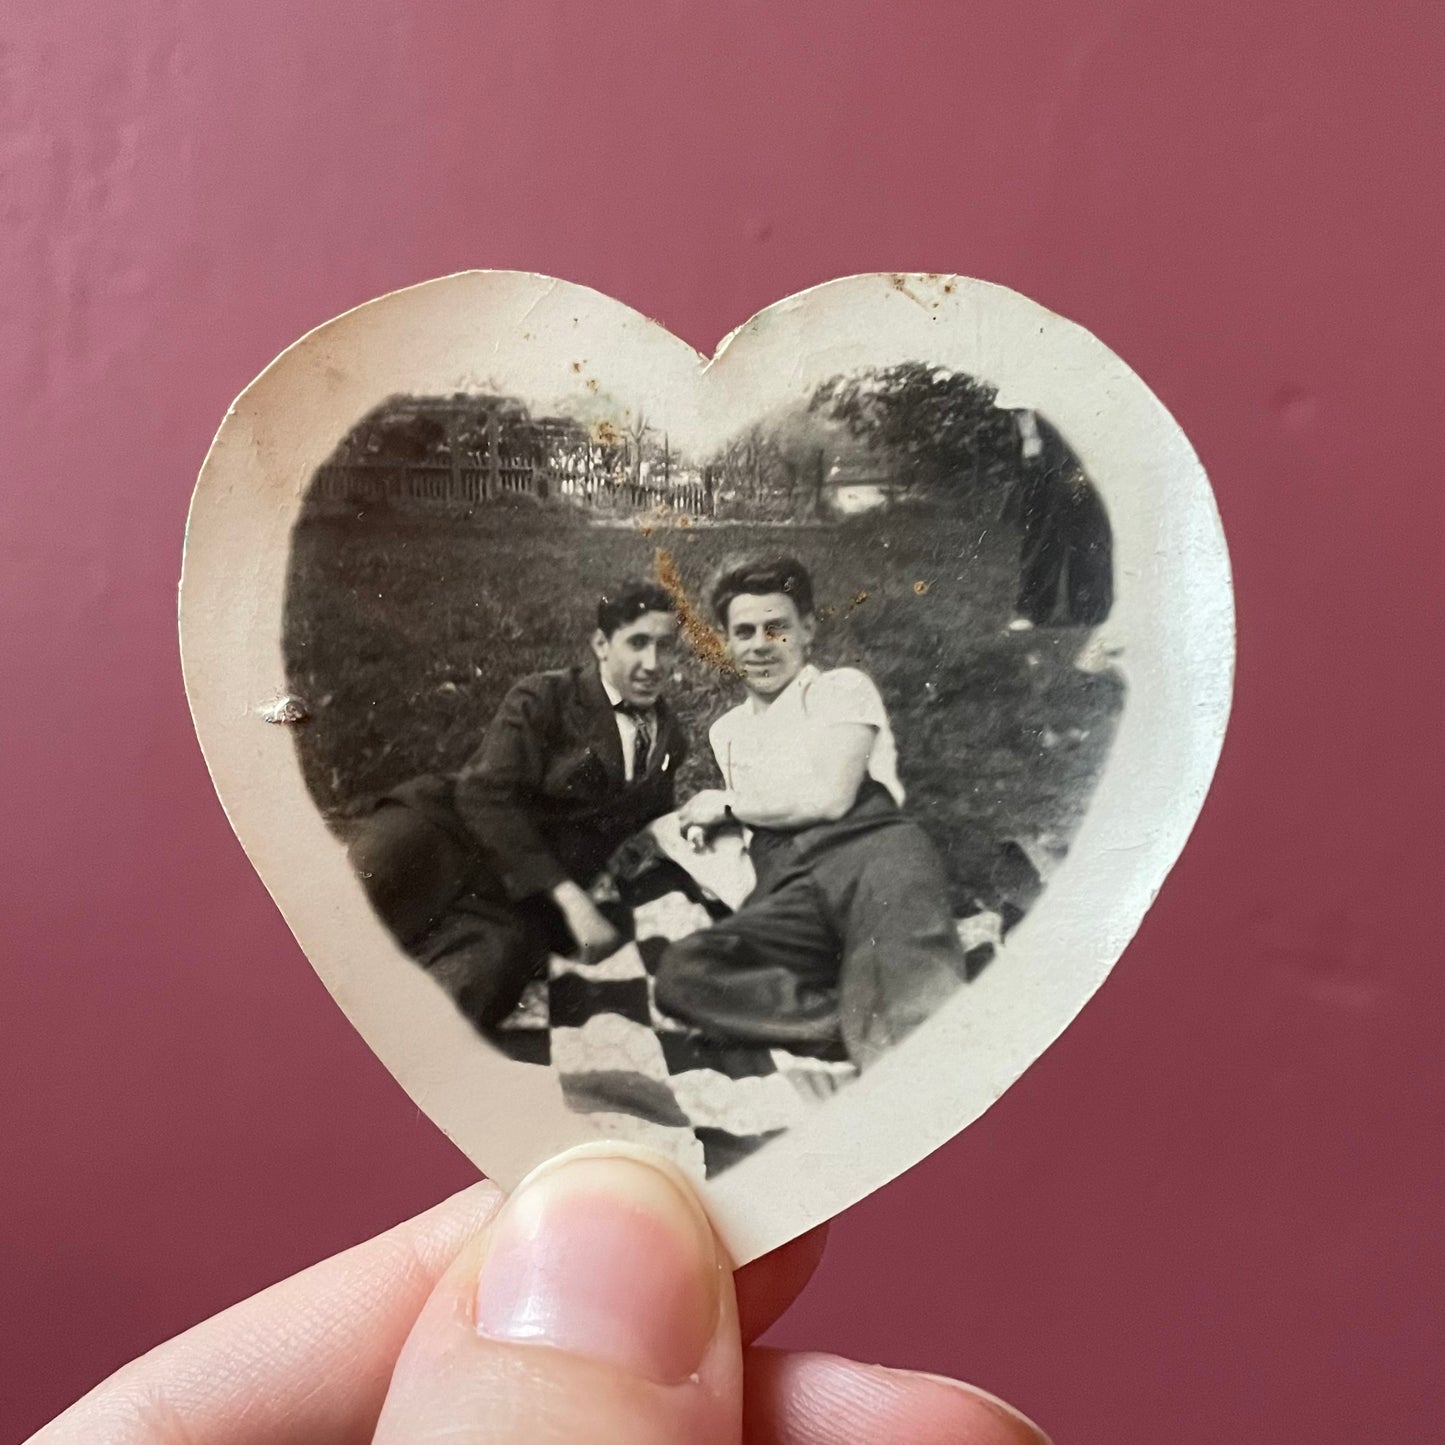 Heart Shaped Snapshot of Two Men | Gay Interest Vintage Photo